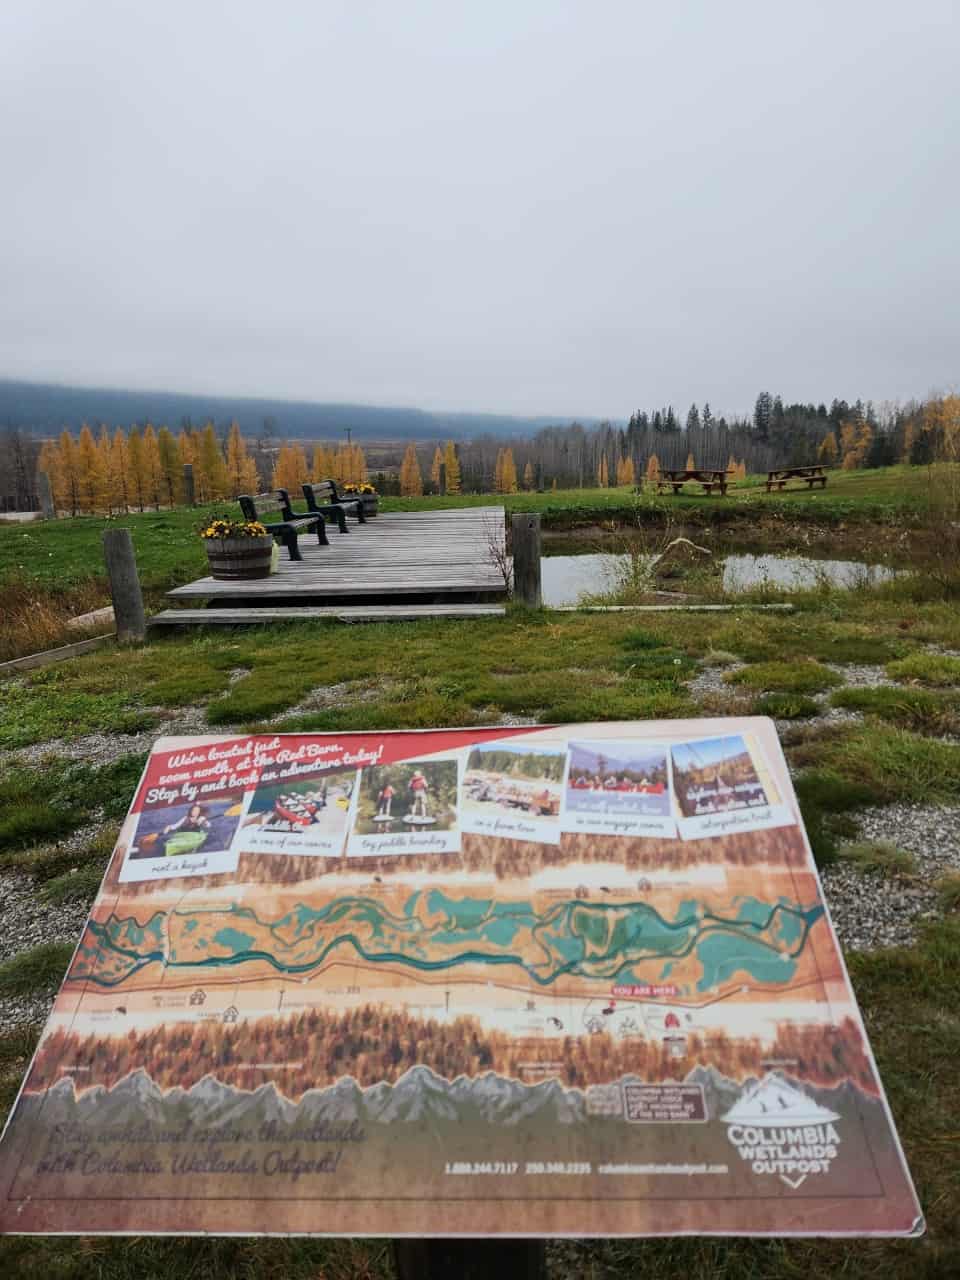 Columbia Wetlands Outpost can help you plan an adventure in the beautiful Columbia River Valley in eastern British Columbia Canada.